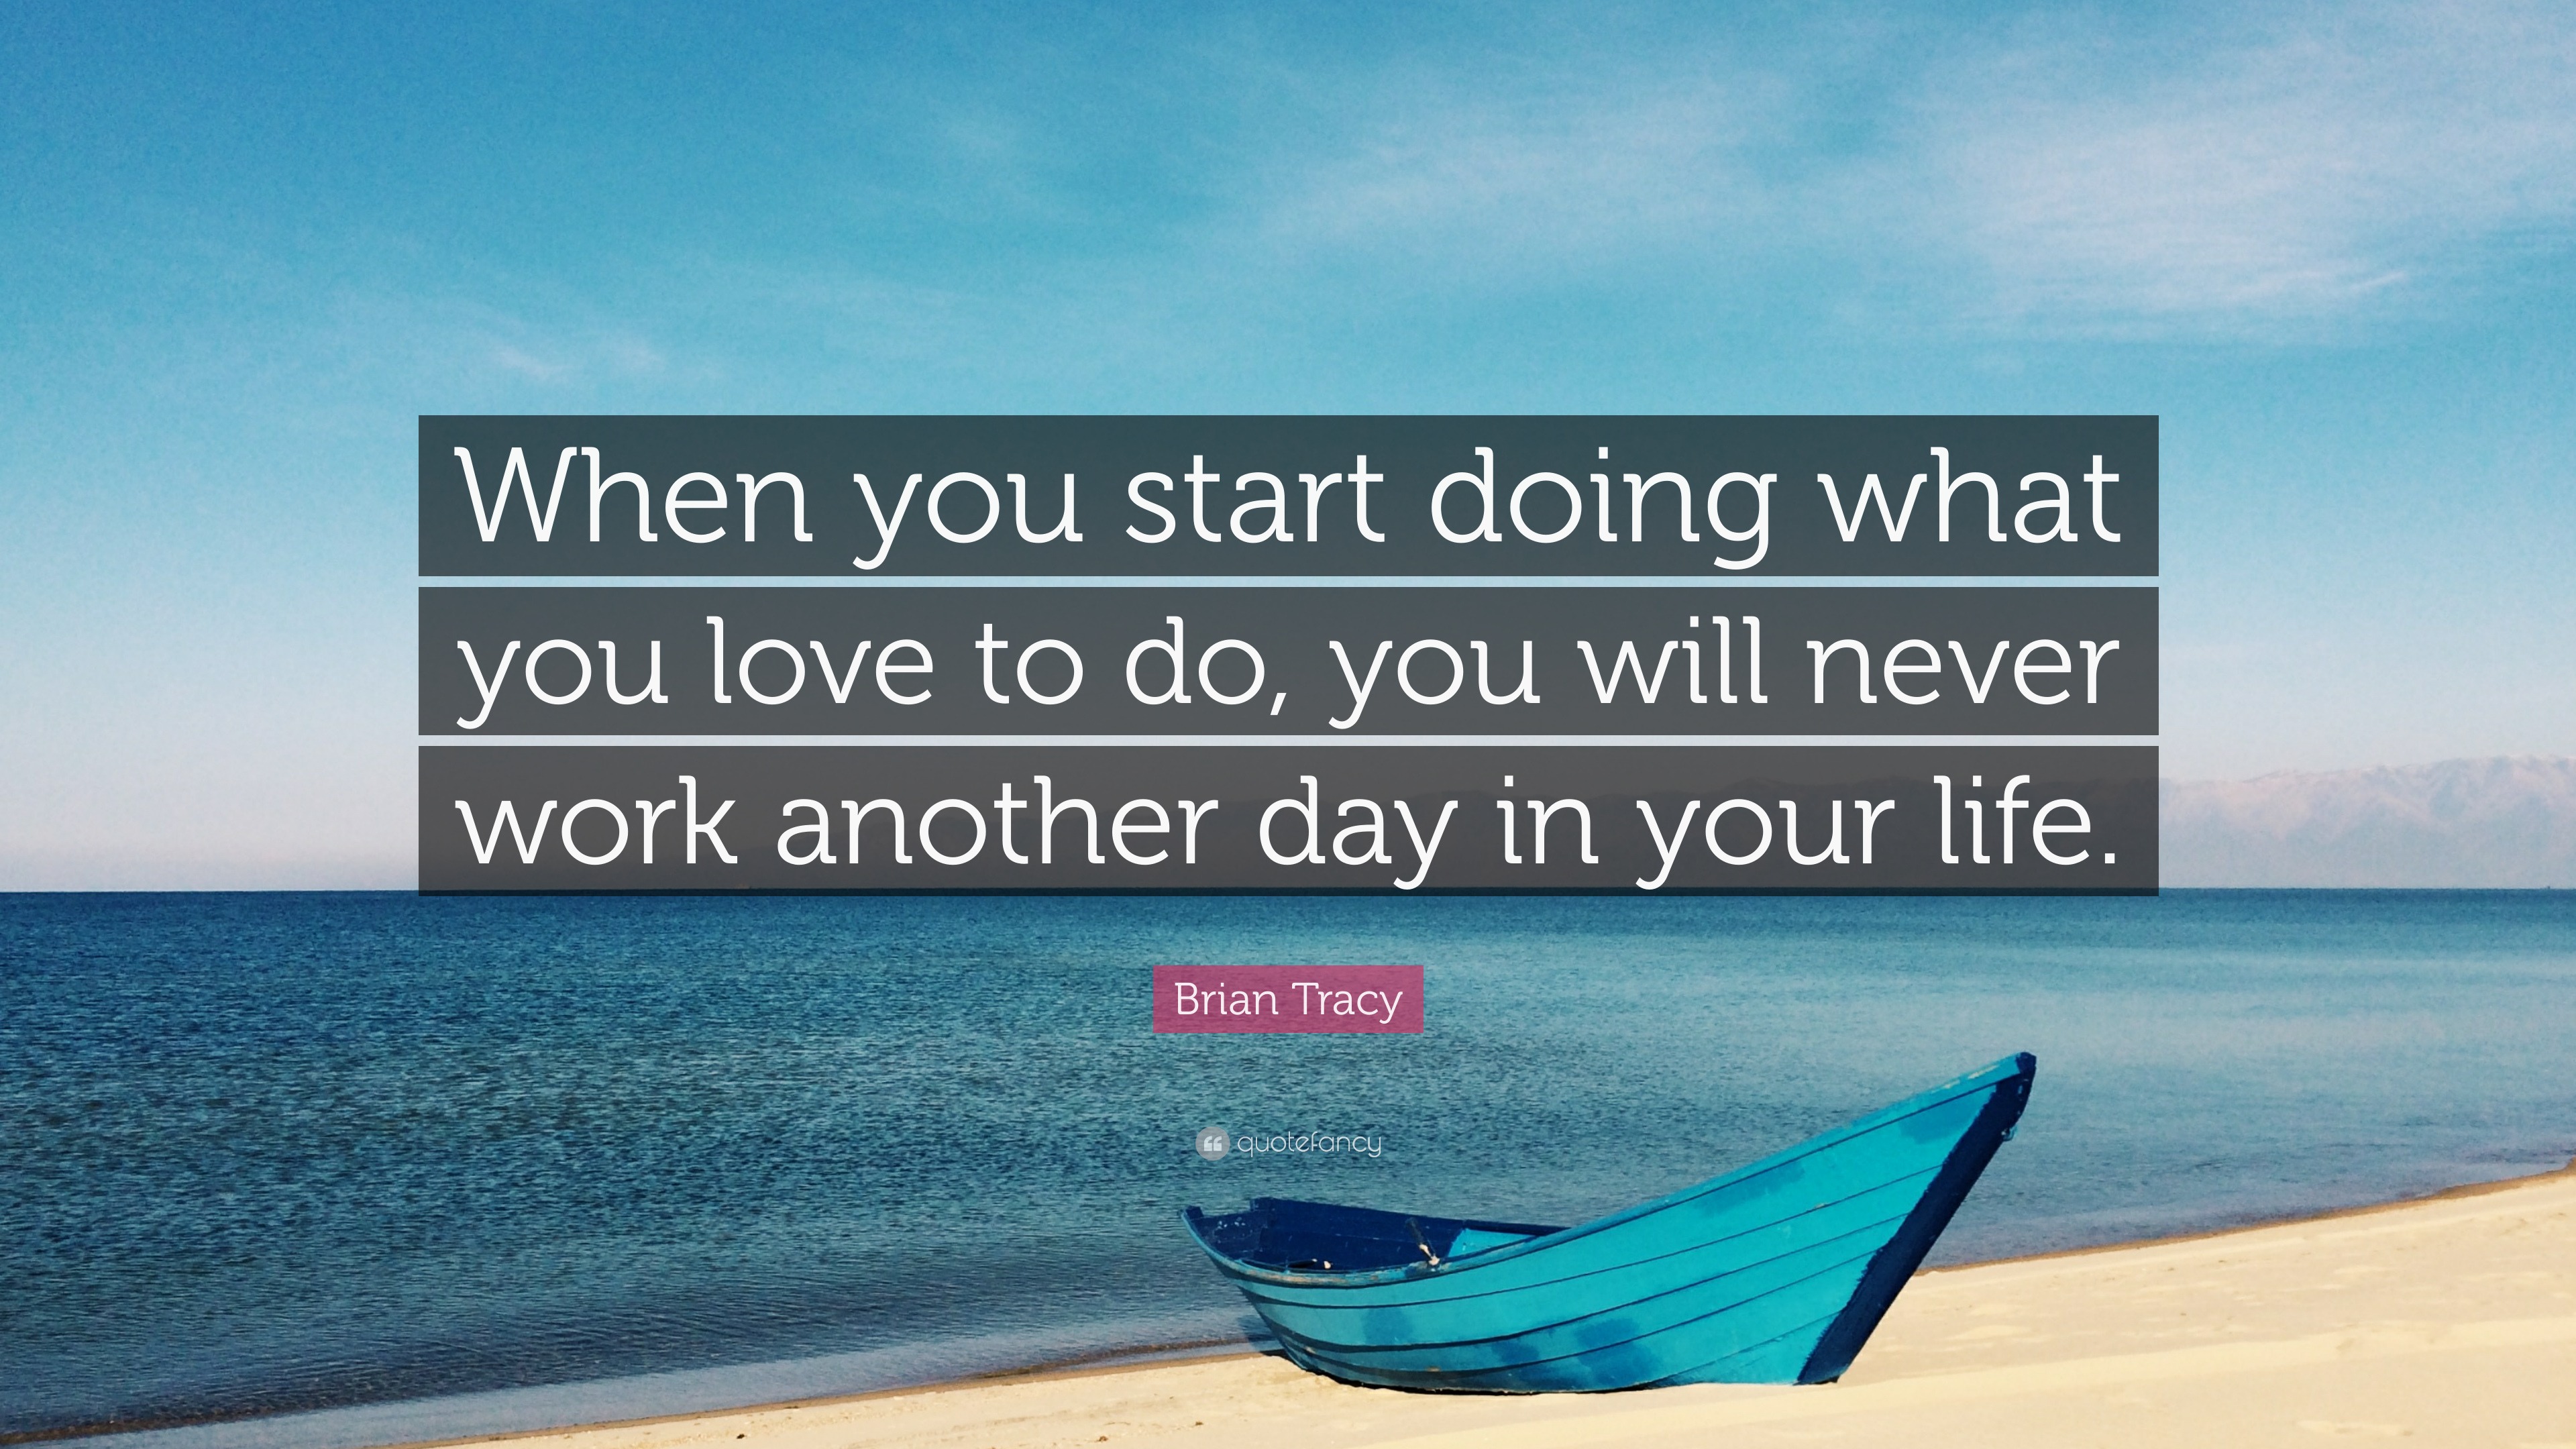 Brian Tracy Quote: “When you start doing what you love to do, you will  never work